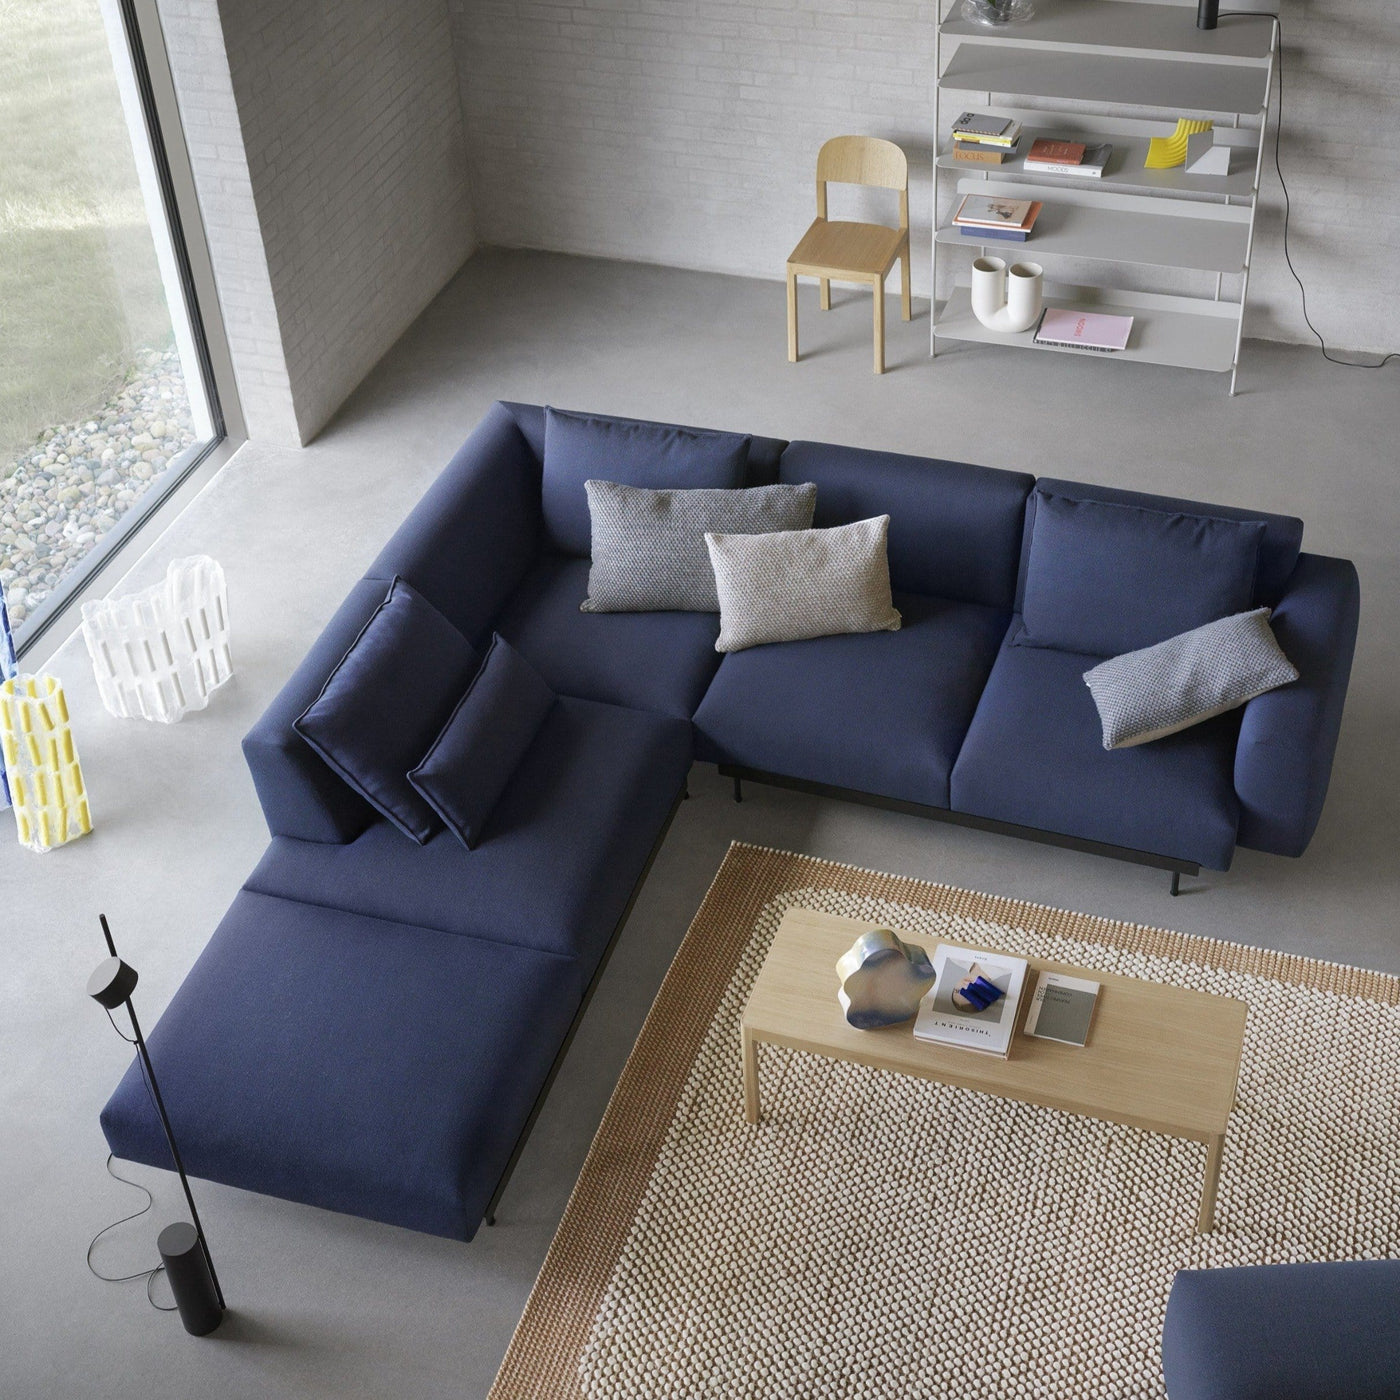 Muuto In Situ Modular Sofa Series. Made to order from someday designs